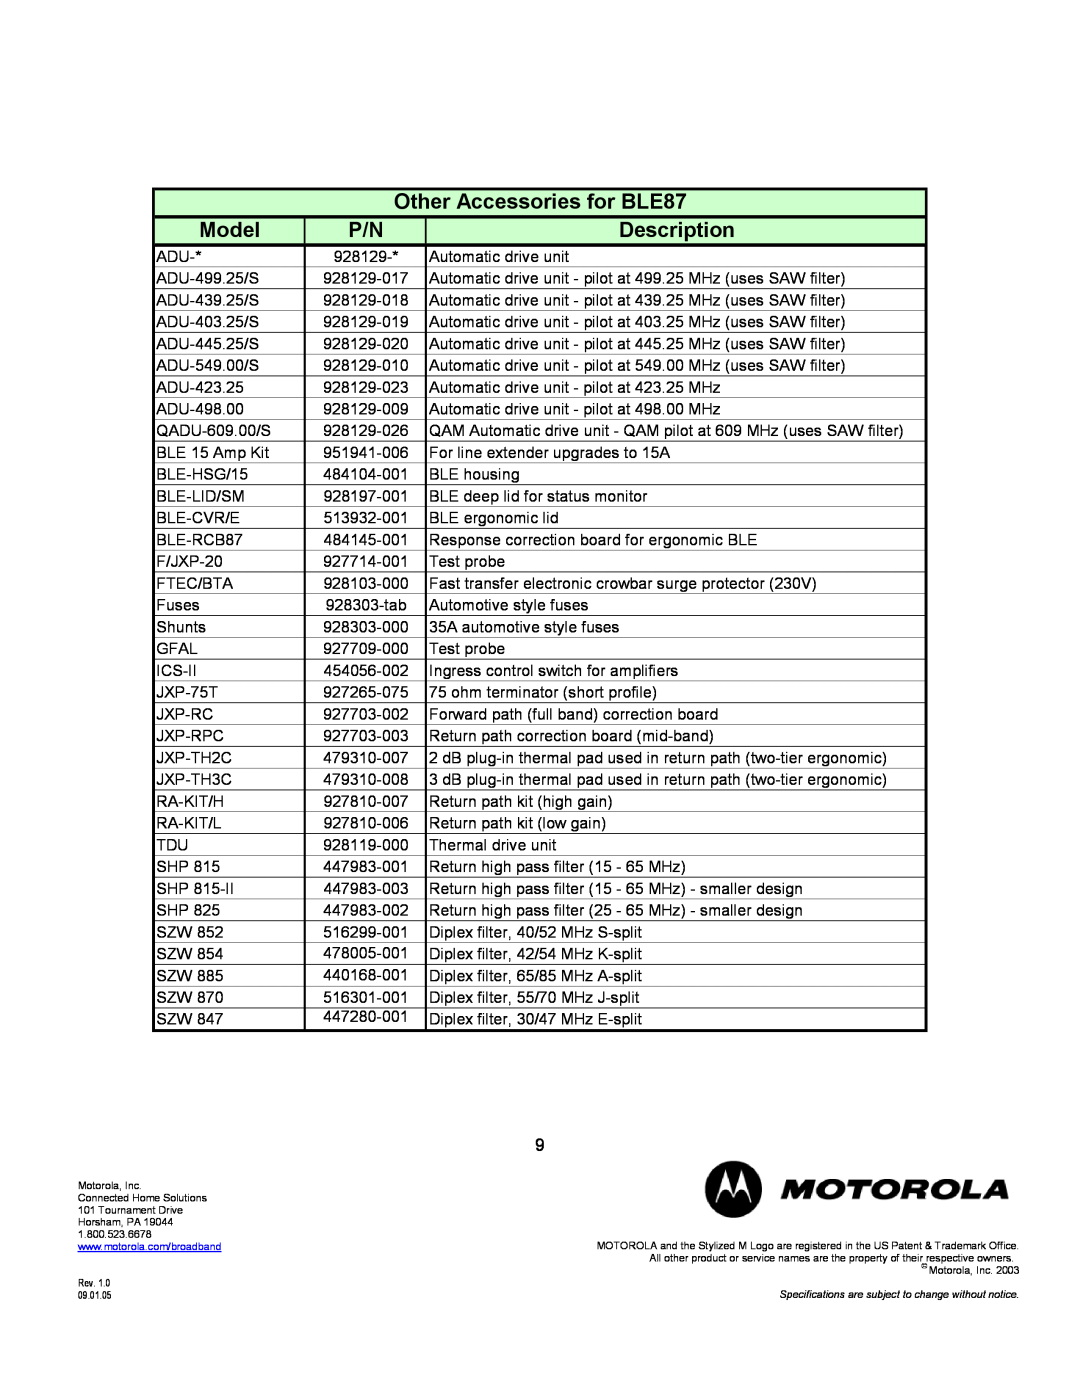 Motorola specifications Other Accessories for BLE87, Model, Description 